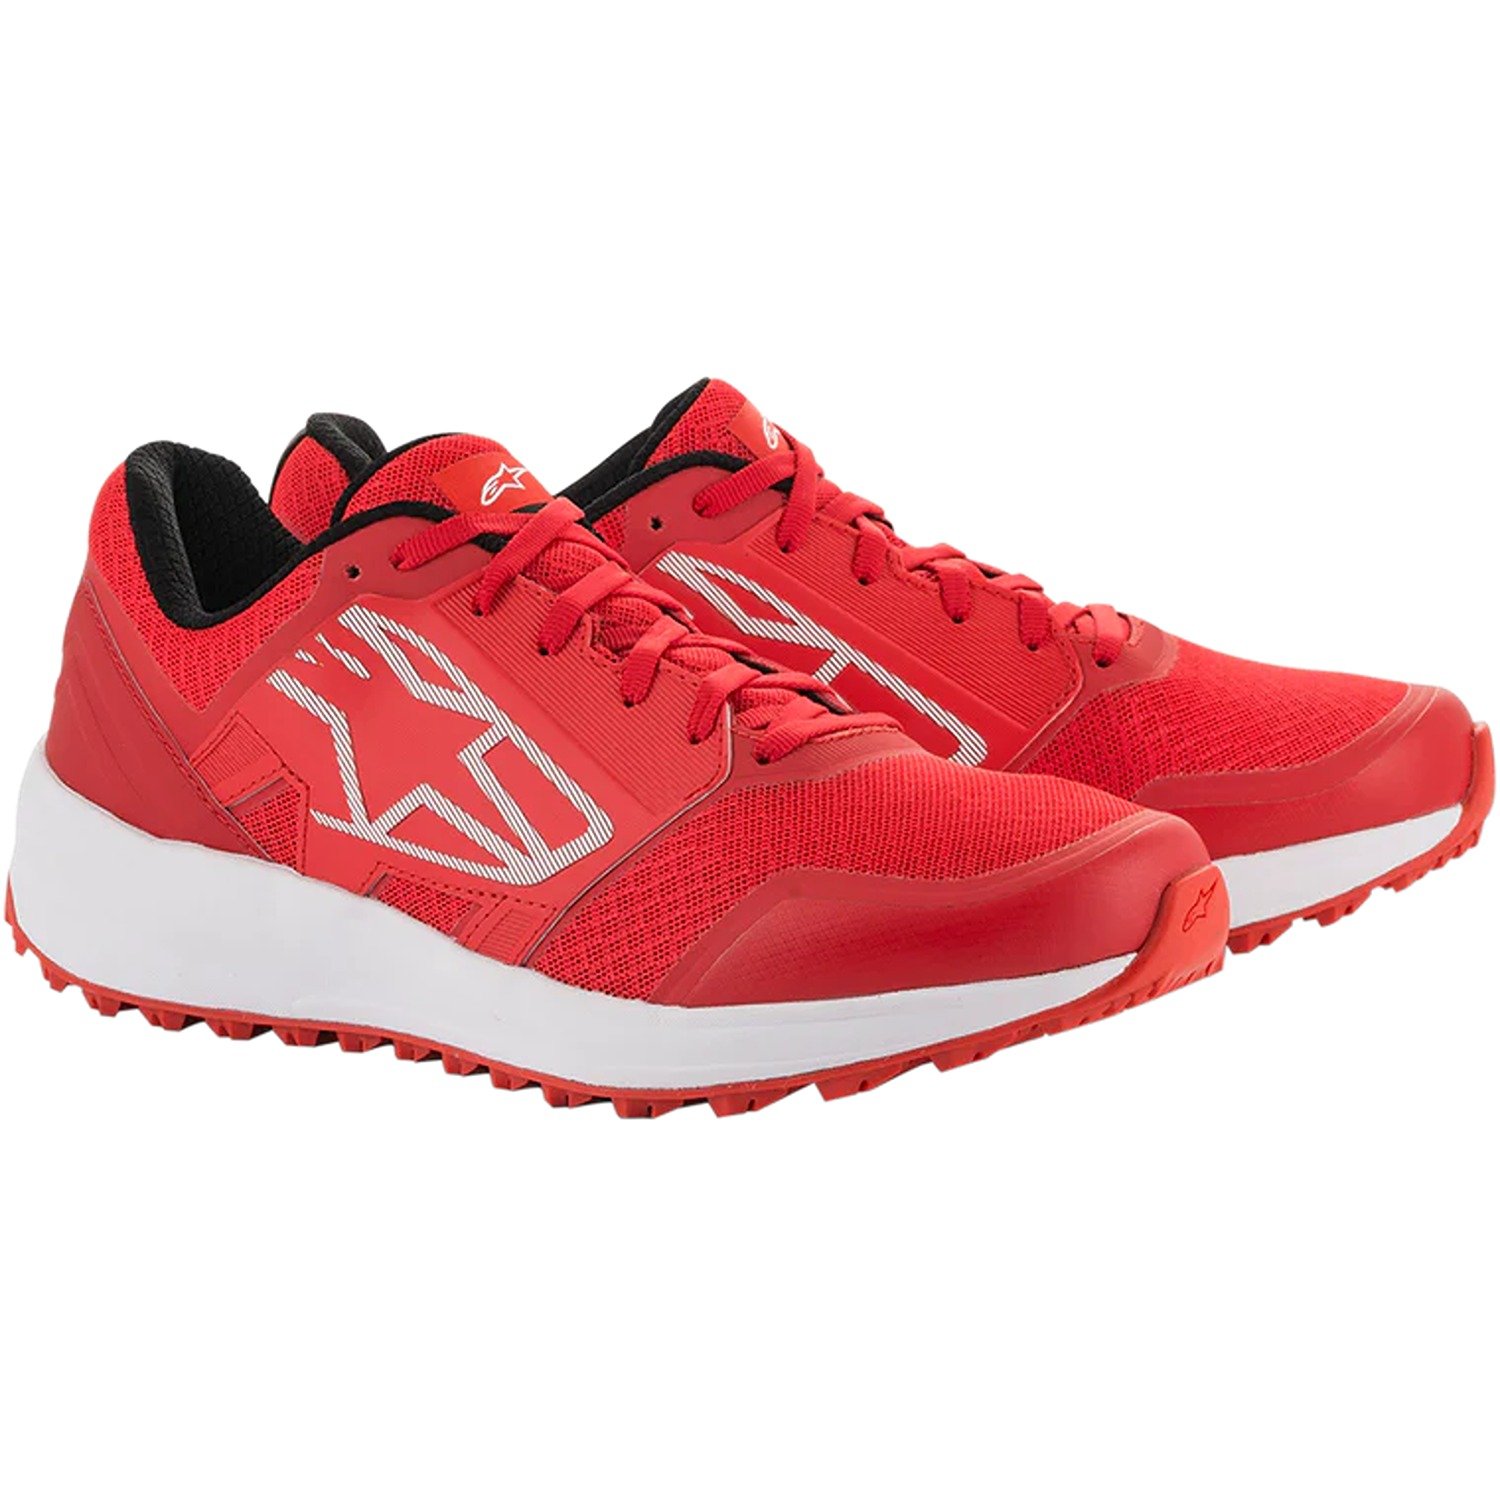 Image of Alpinestars Meta Trail Shoes Red White Size US 6 ID 8059175107672